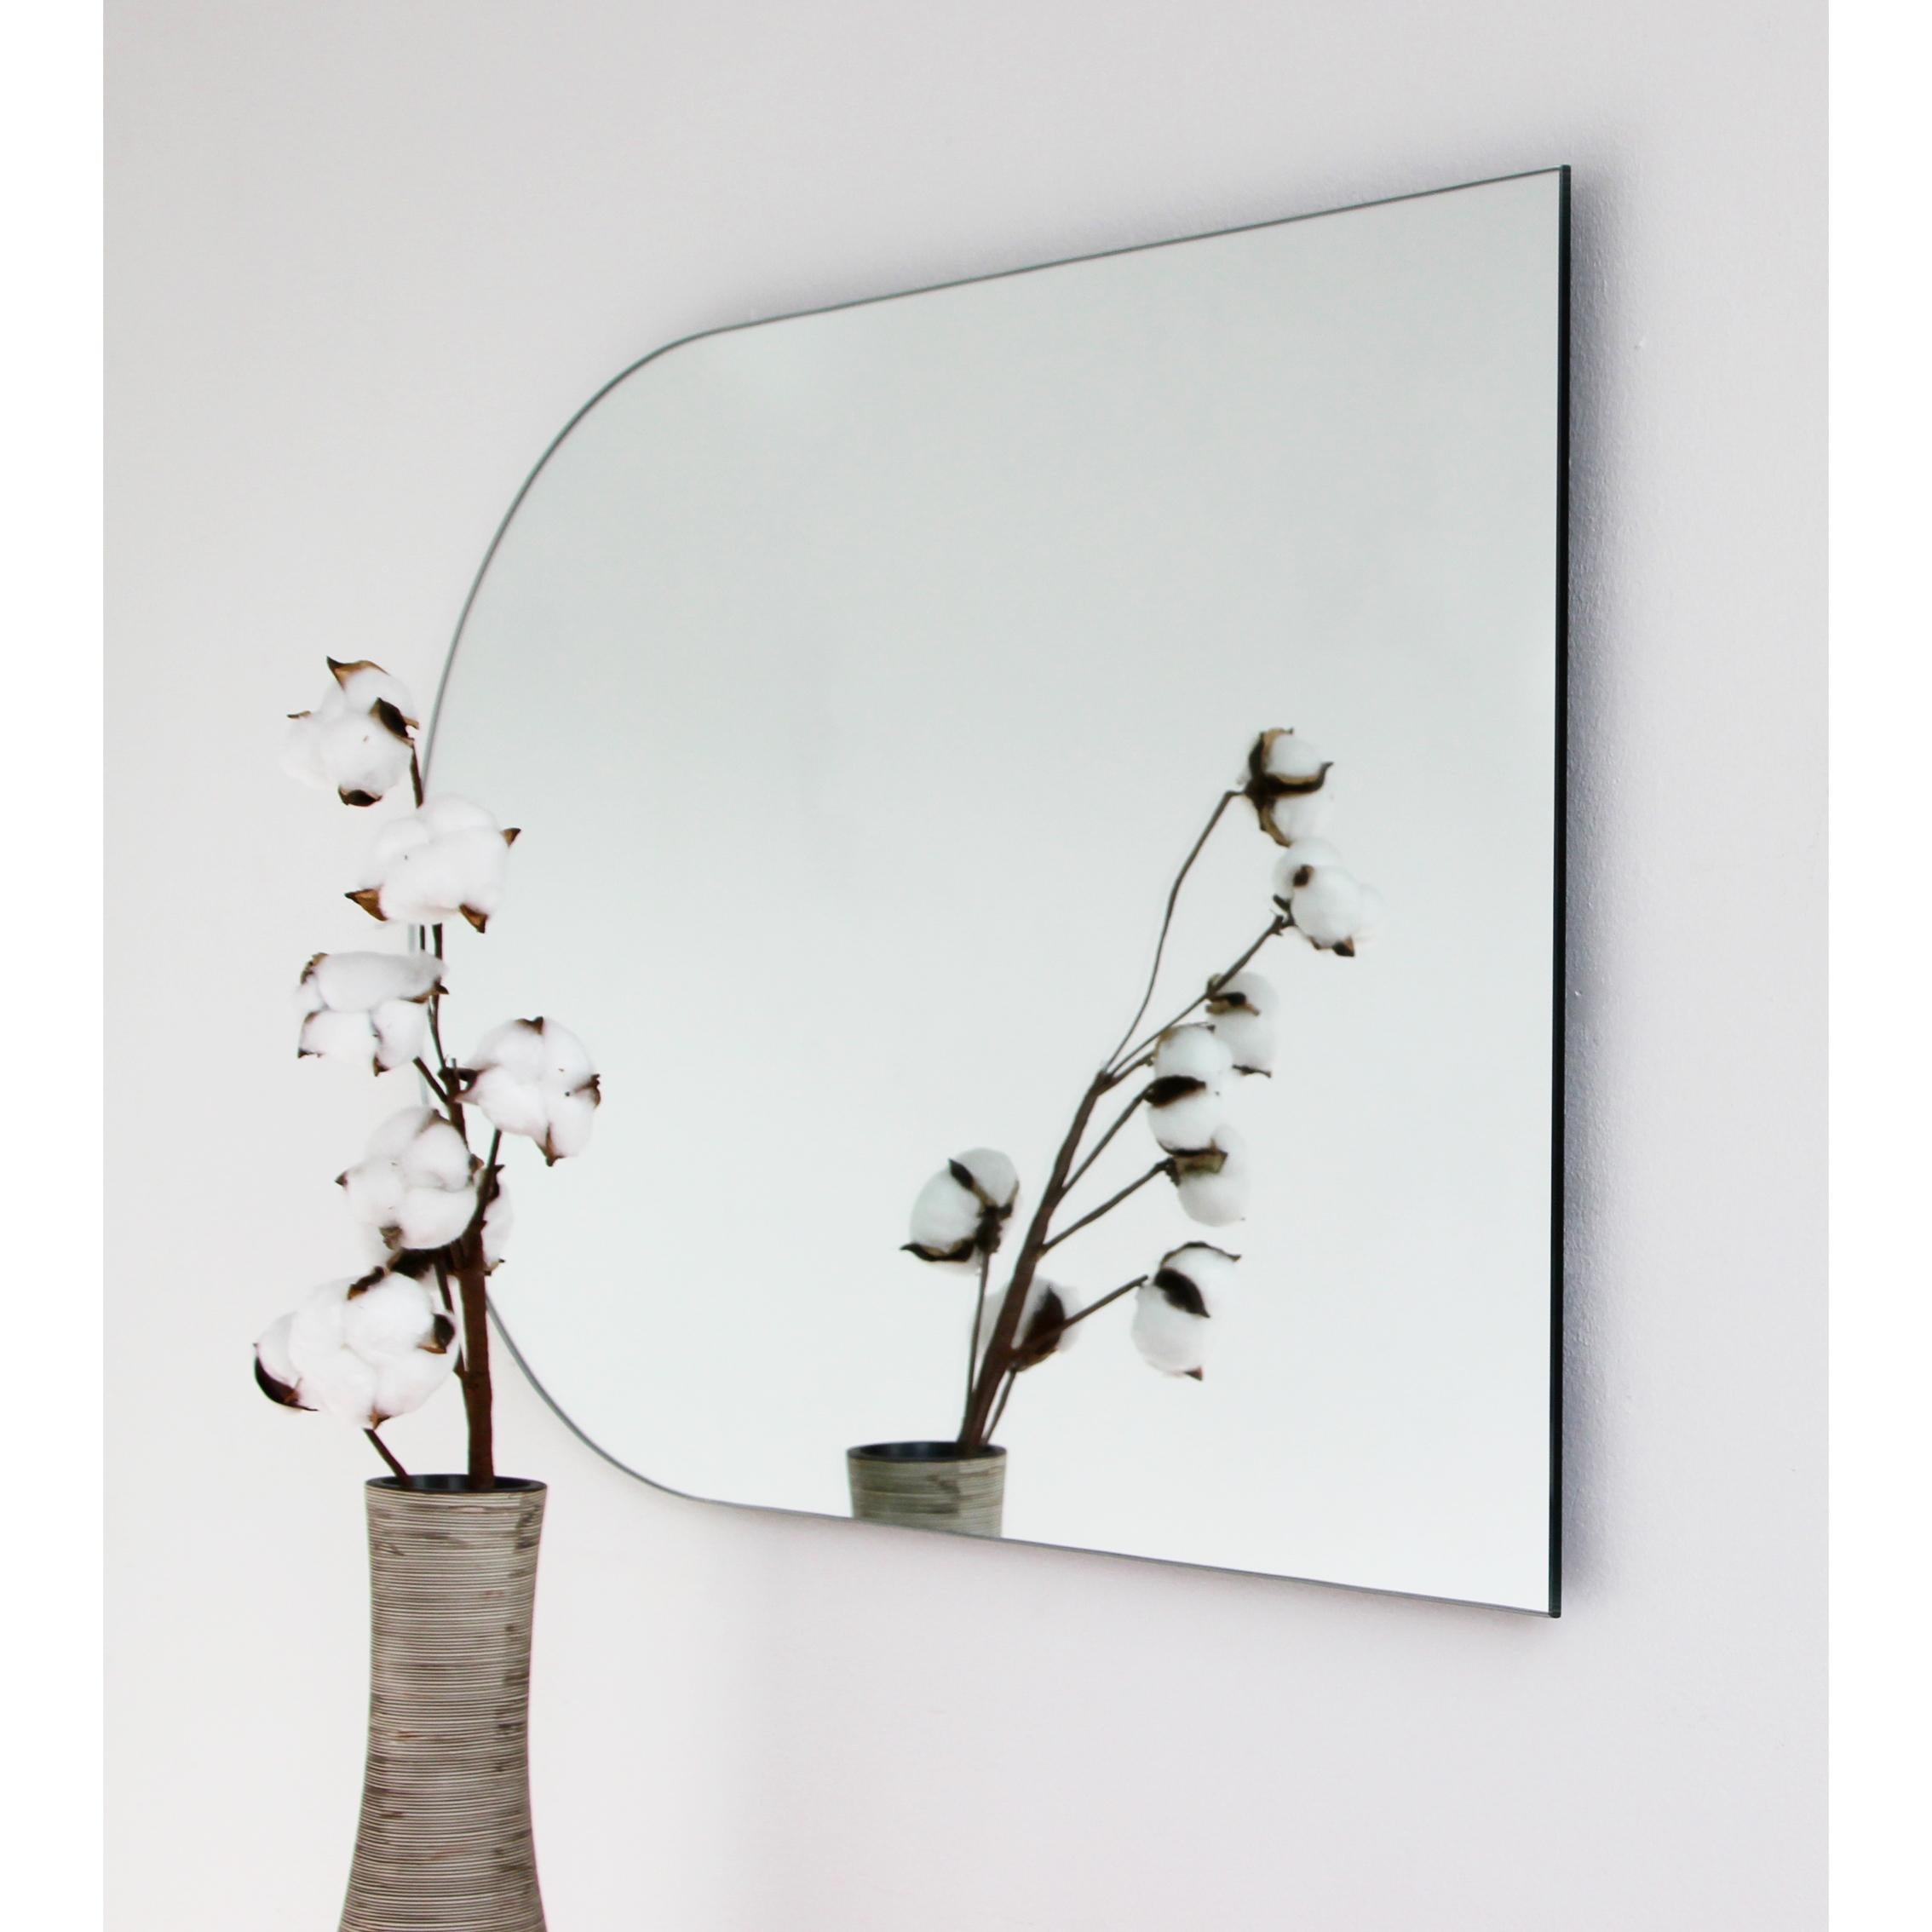 British Arcus Arch shaped Modern Contemporary Versatile Frameless Mirror, Large For Sale